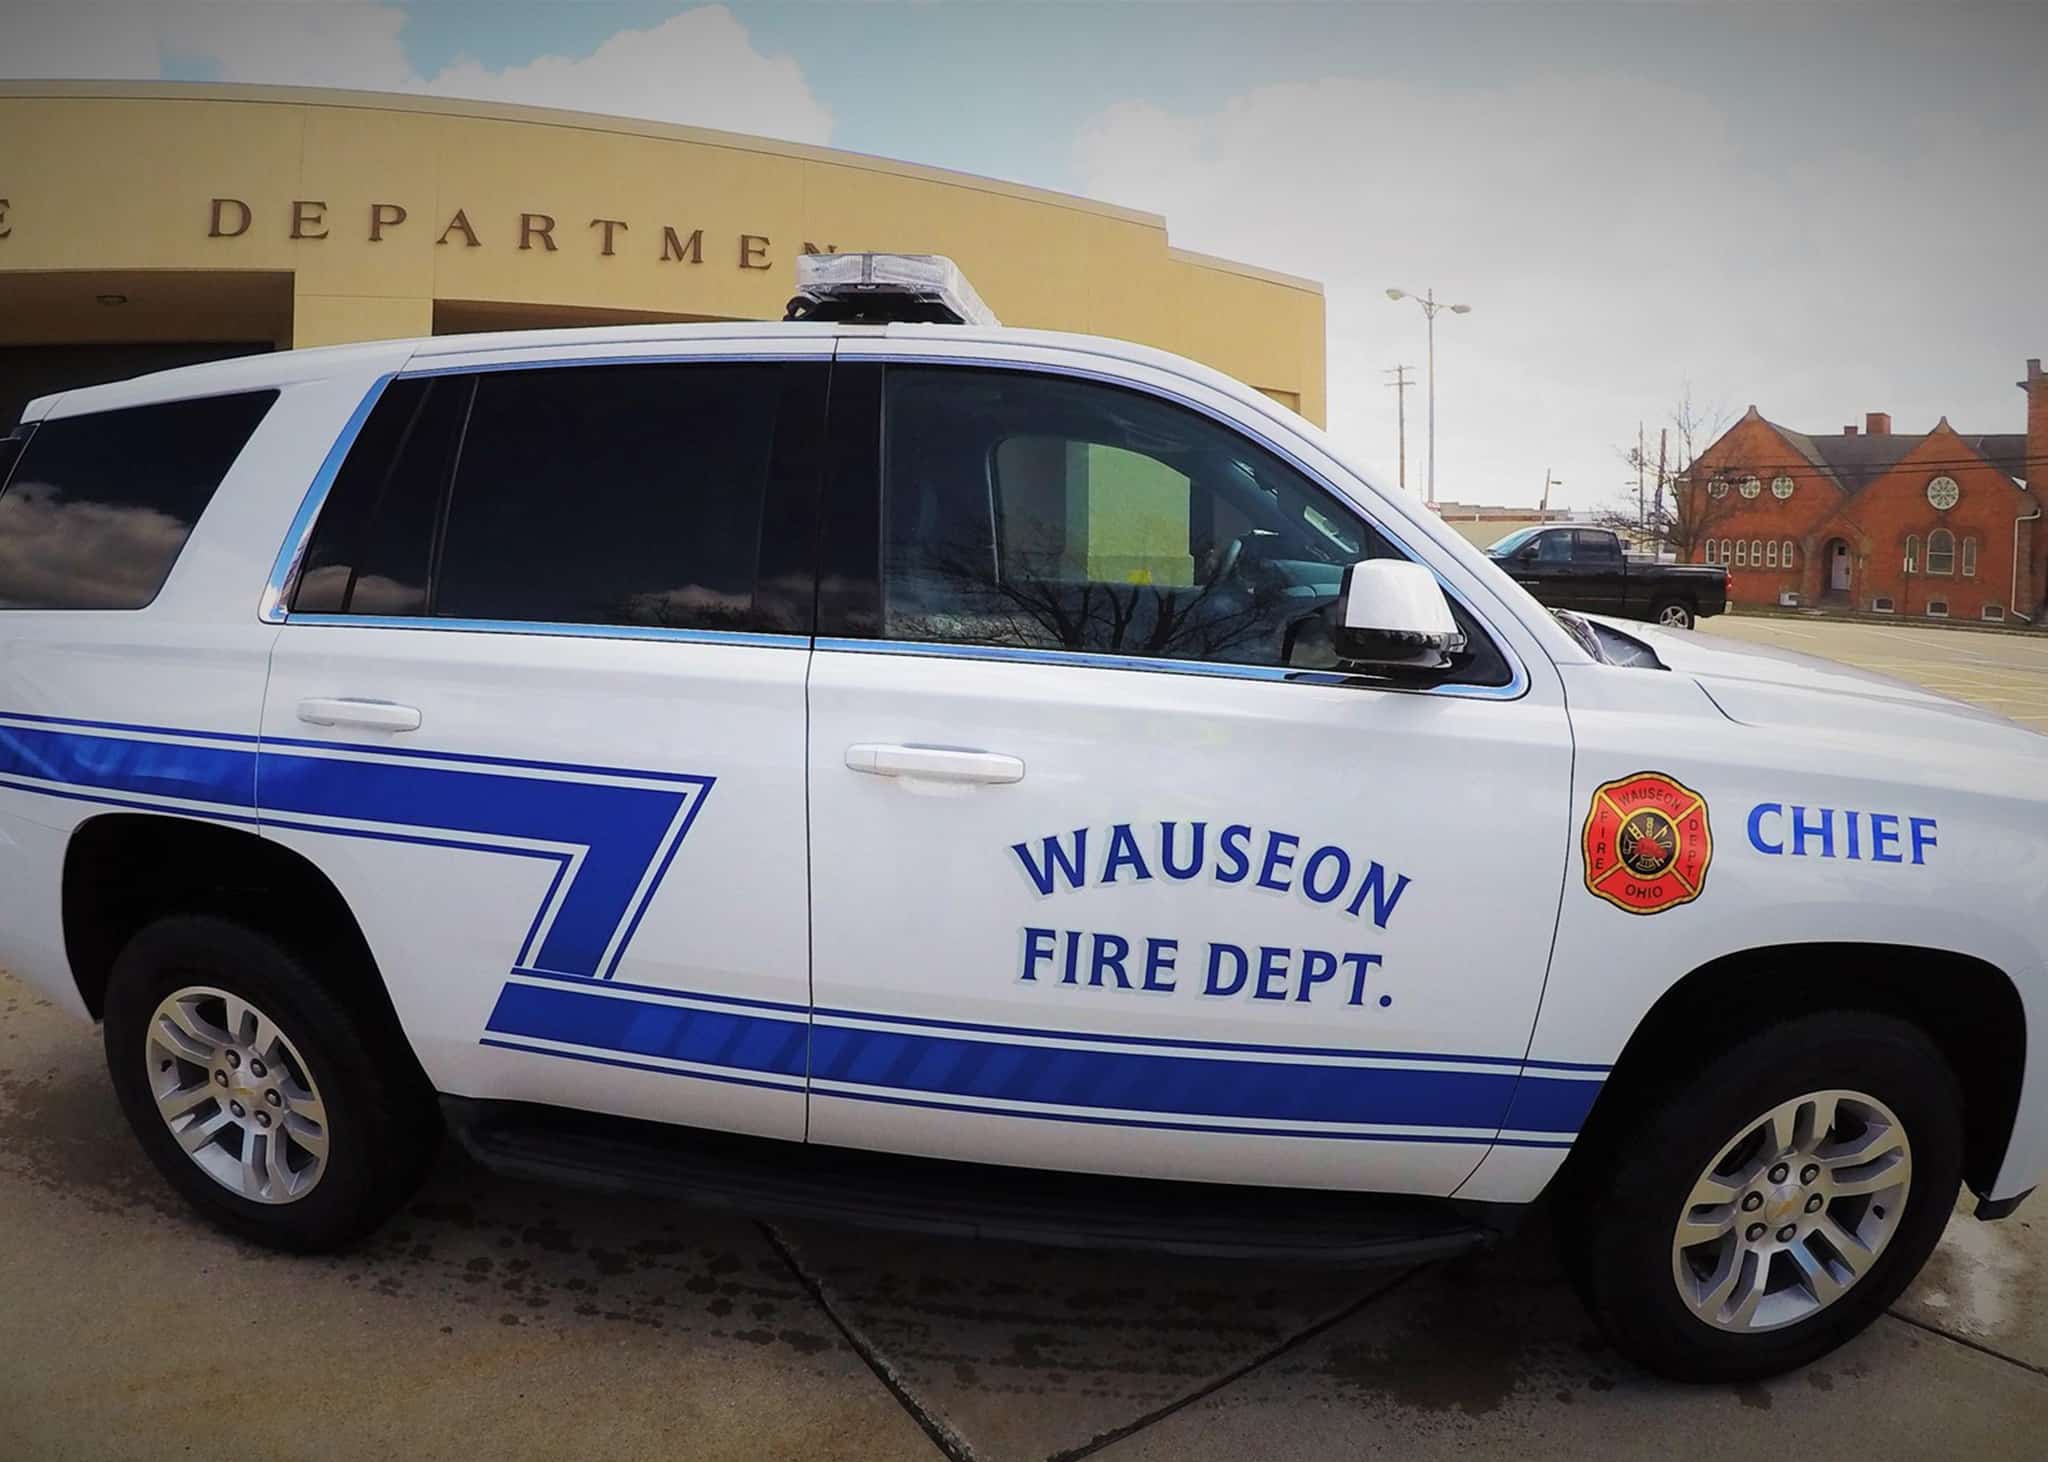 The Fire Chief's sport utility vehicle parked in front of the fire station.